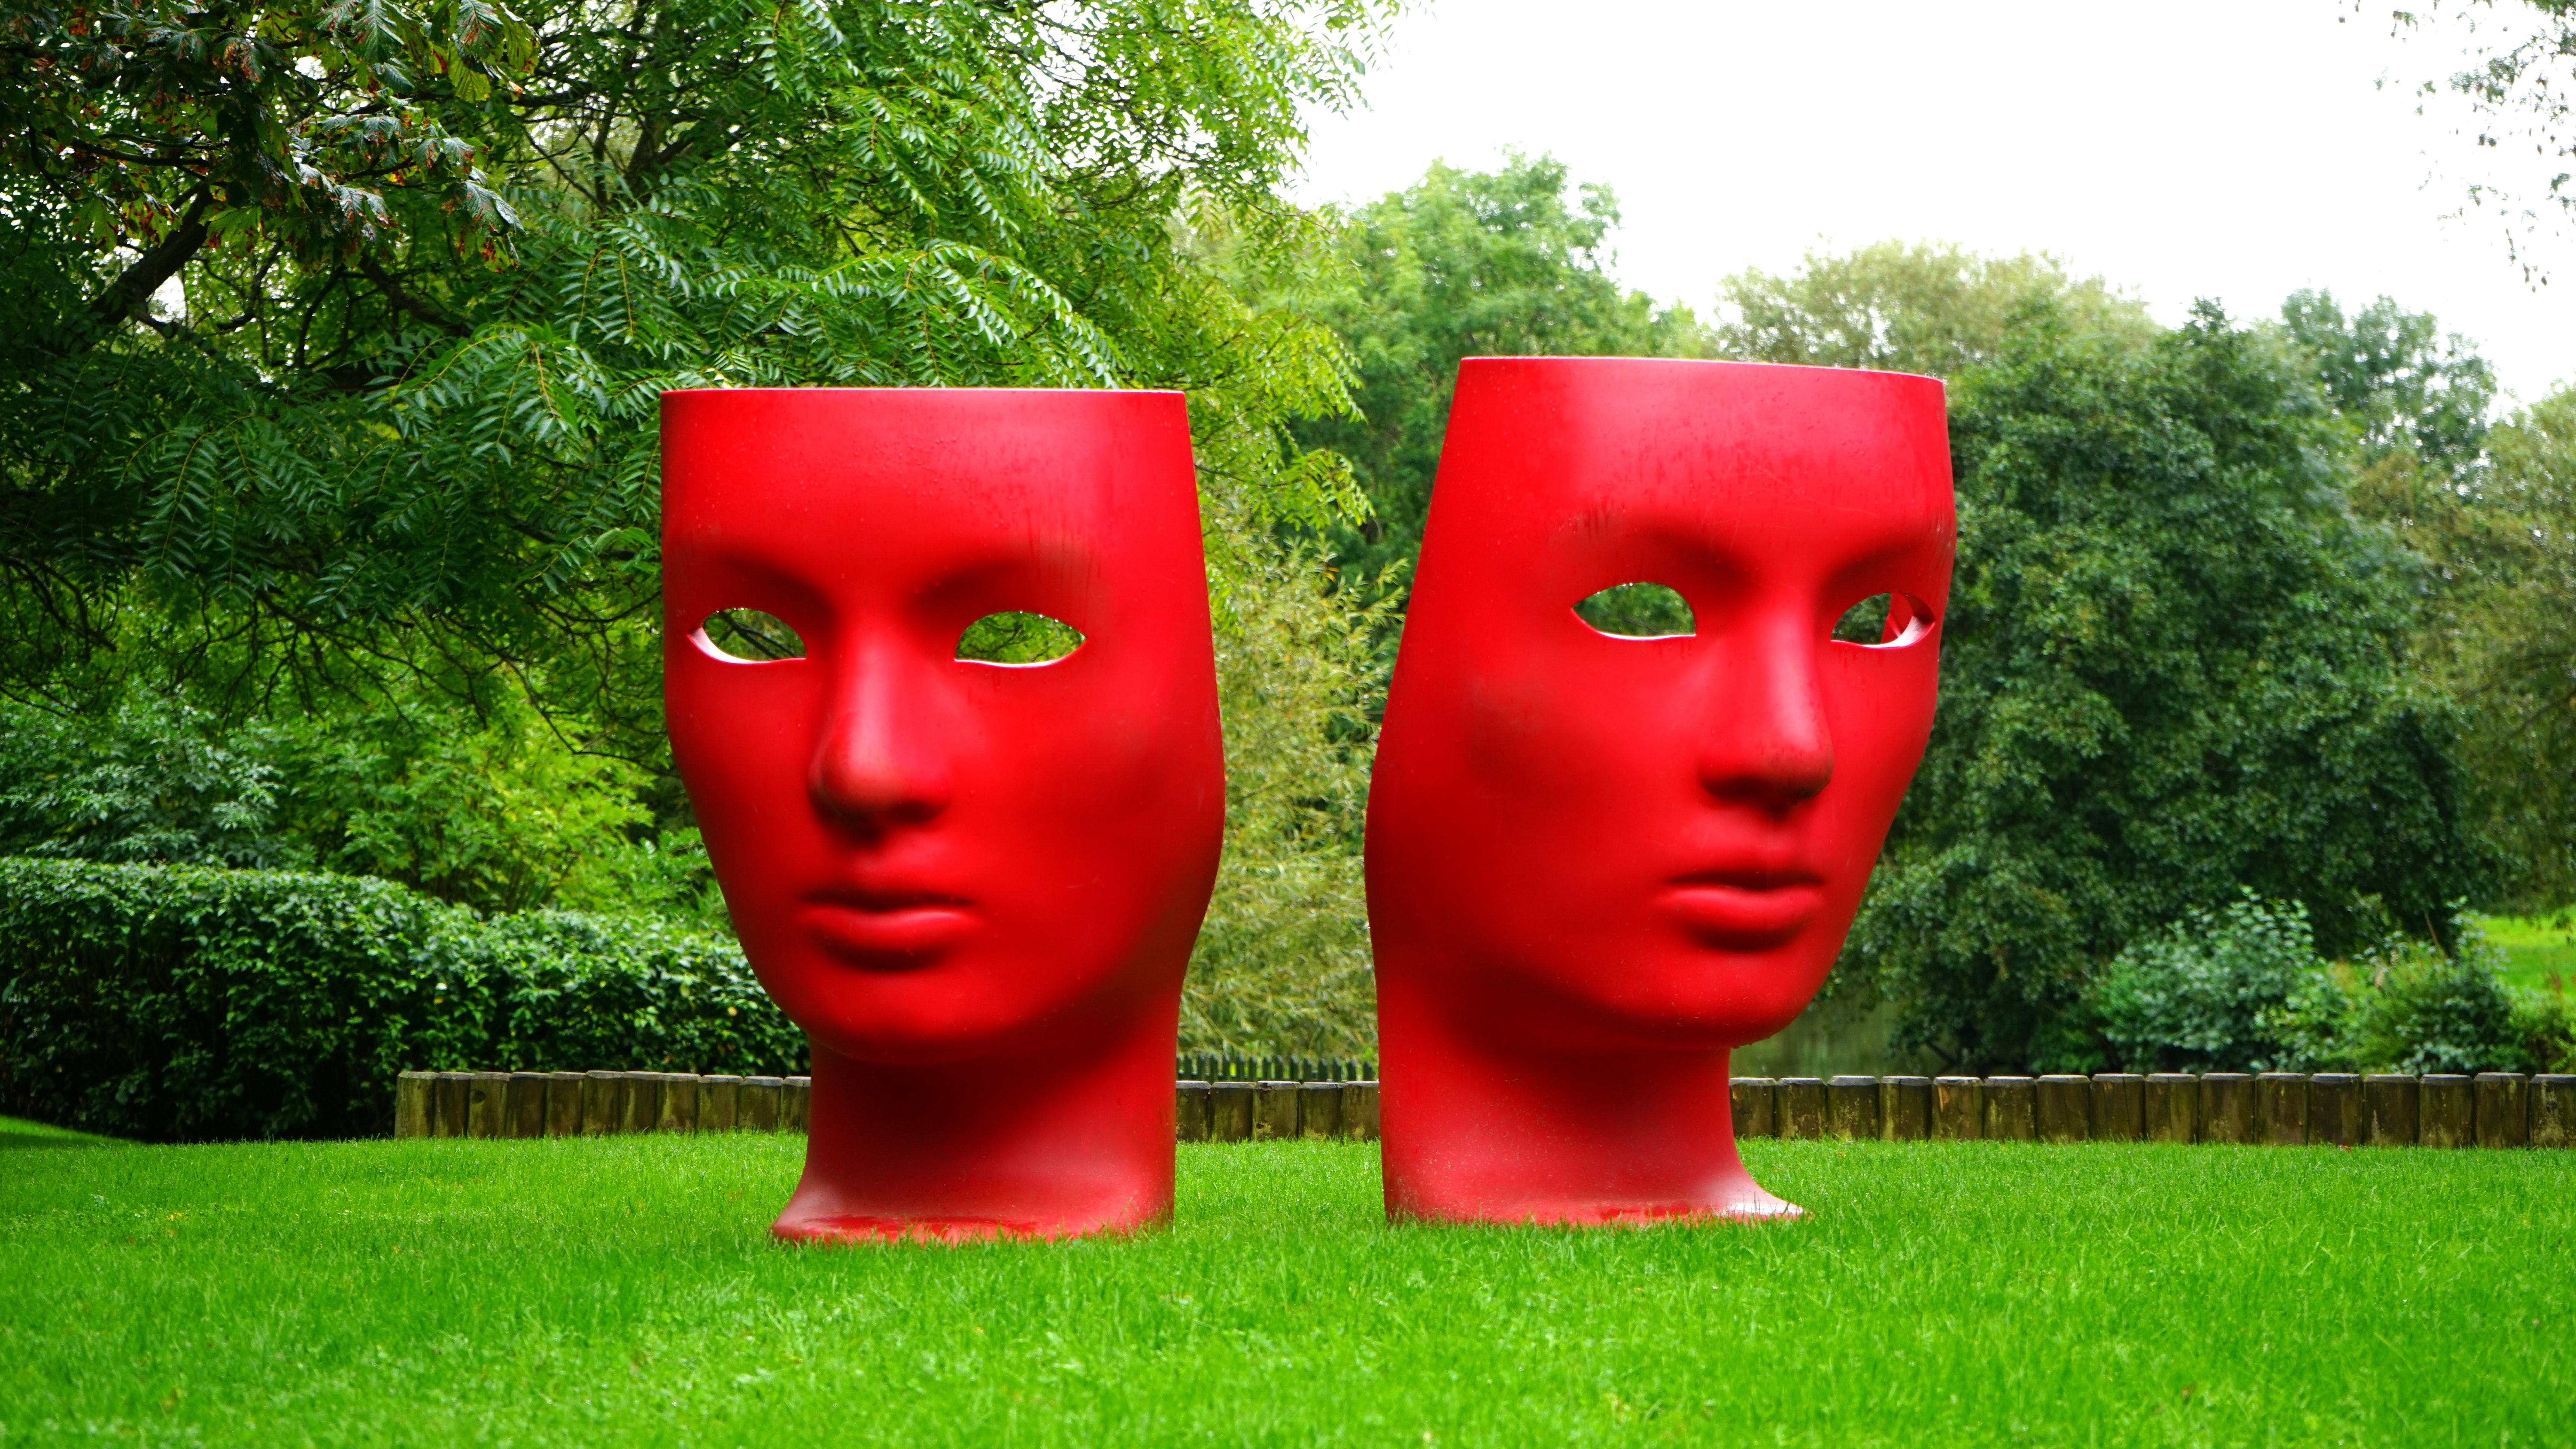 Red Human Face Monument on Green Grass Field, Acting, Park, Theatrical, Theatre, HQ Photo